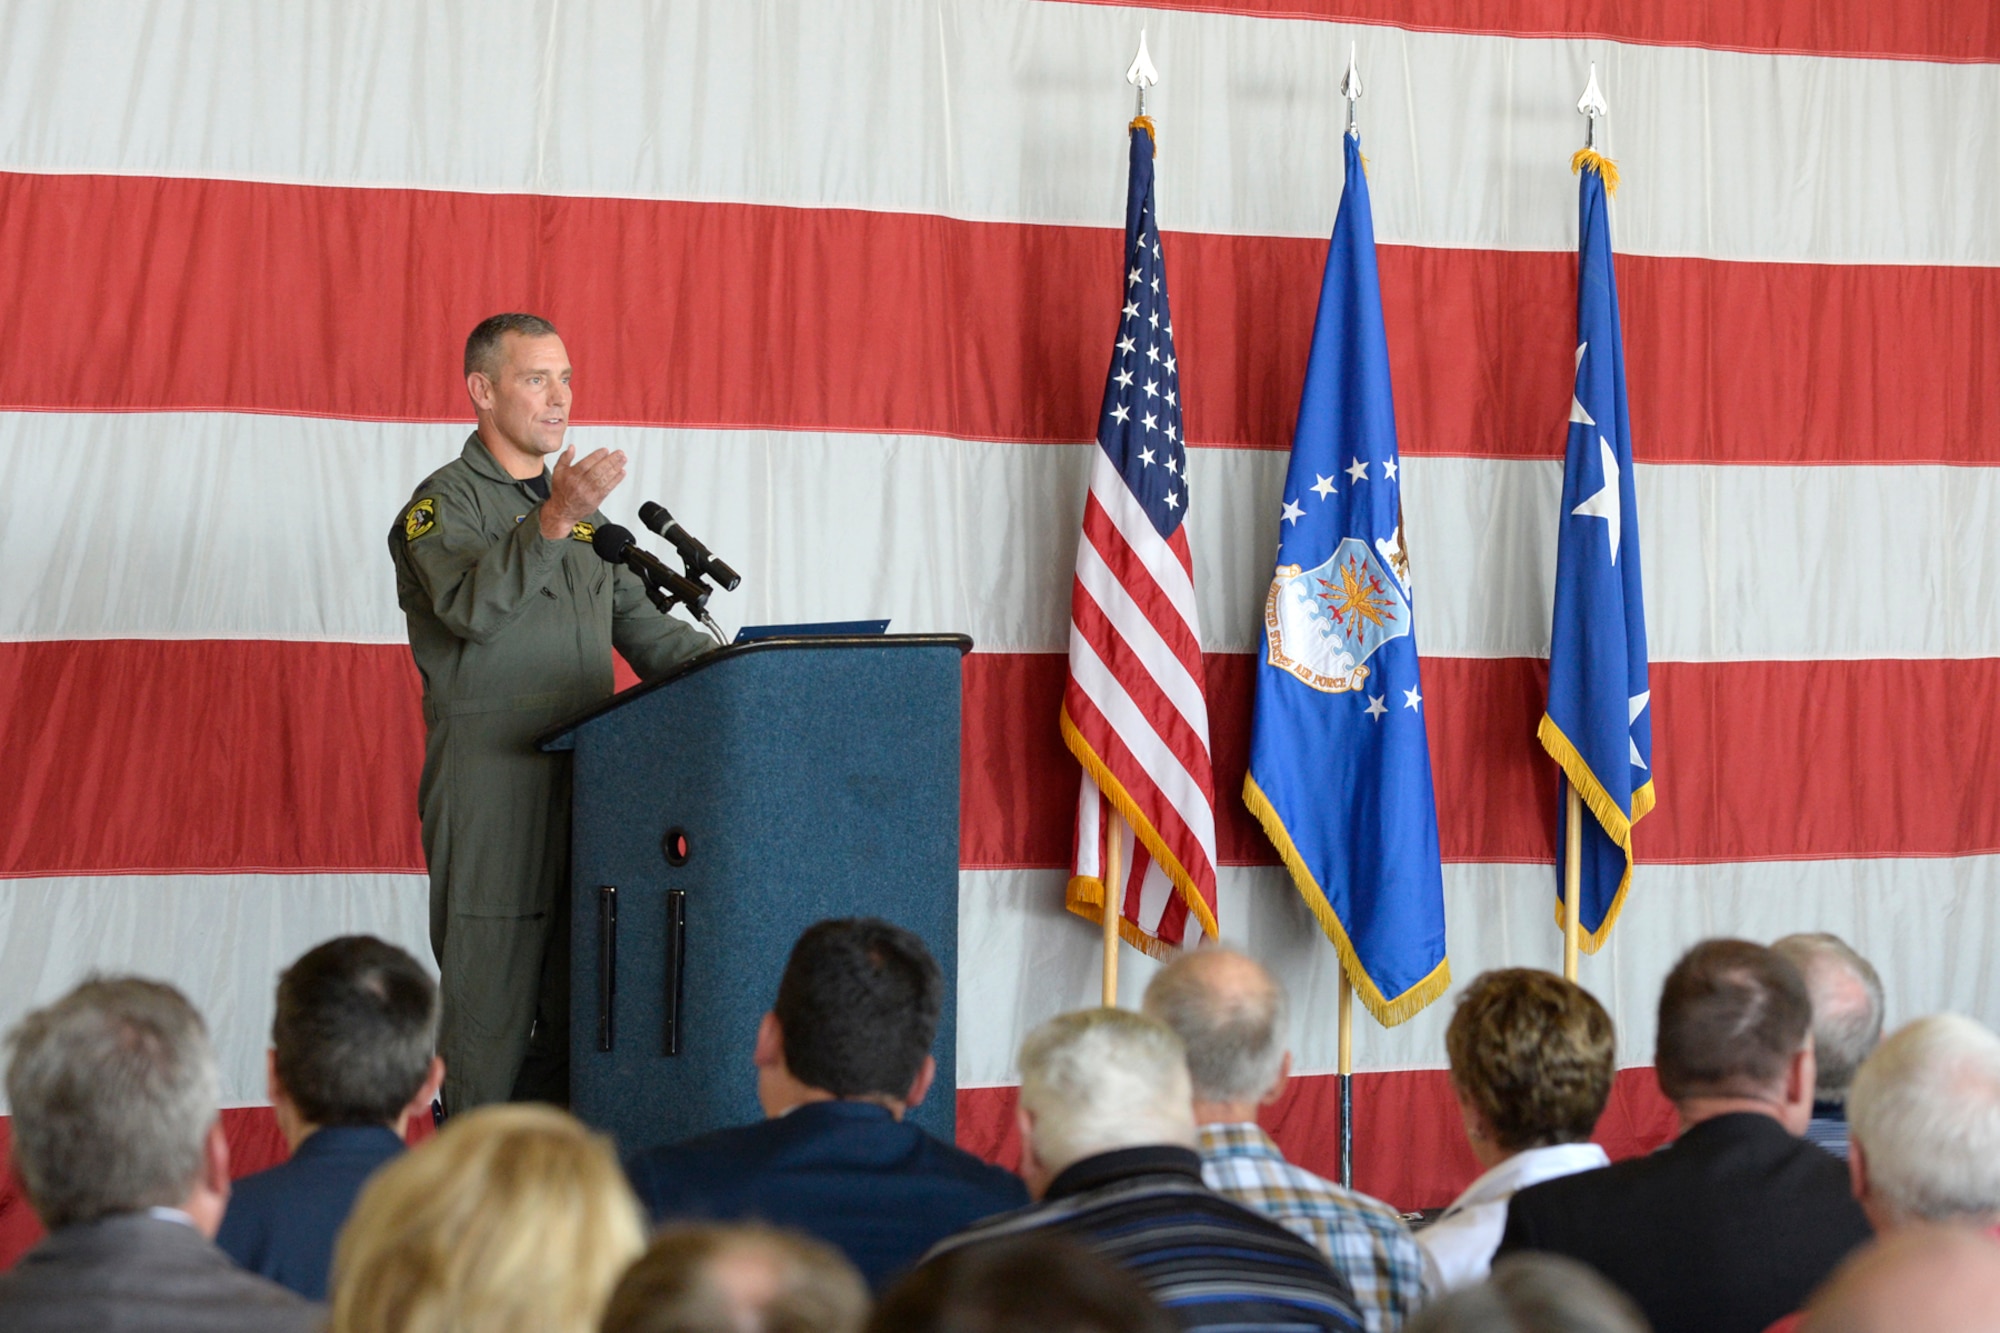 Col. David W. Smith, 419th Fighter Wing commander, addresses guests at the Viper Out ceremony, a farewell to the F-16, Sept. 8, 2017, at Hill Air Force Base, Utah.  Smith spoke about the F-16’s enduring legacy. (U.S. Air Force photo by Todd Cromar)